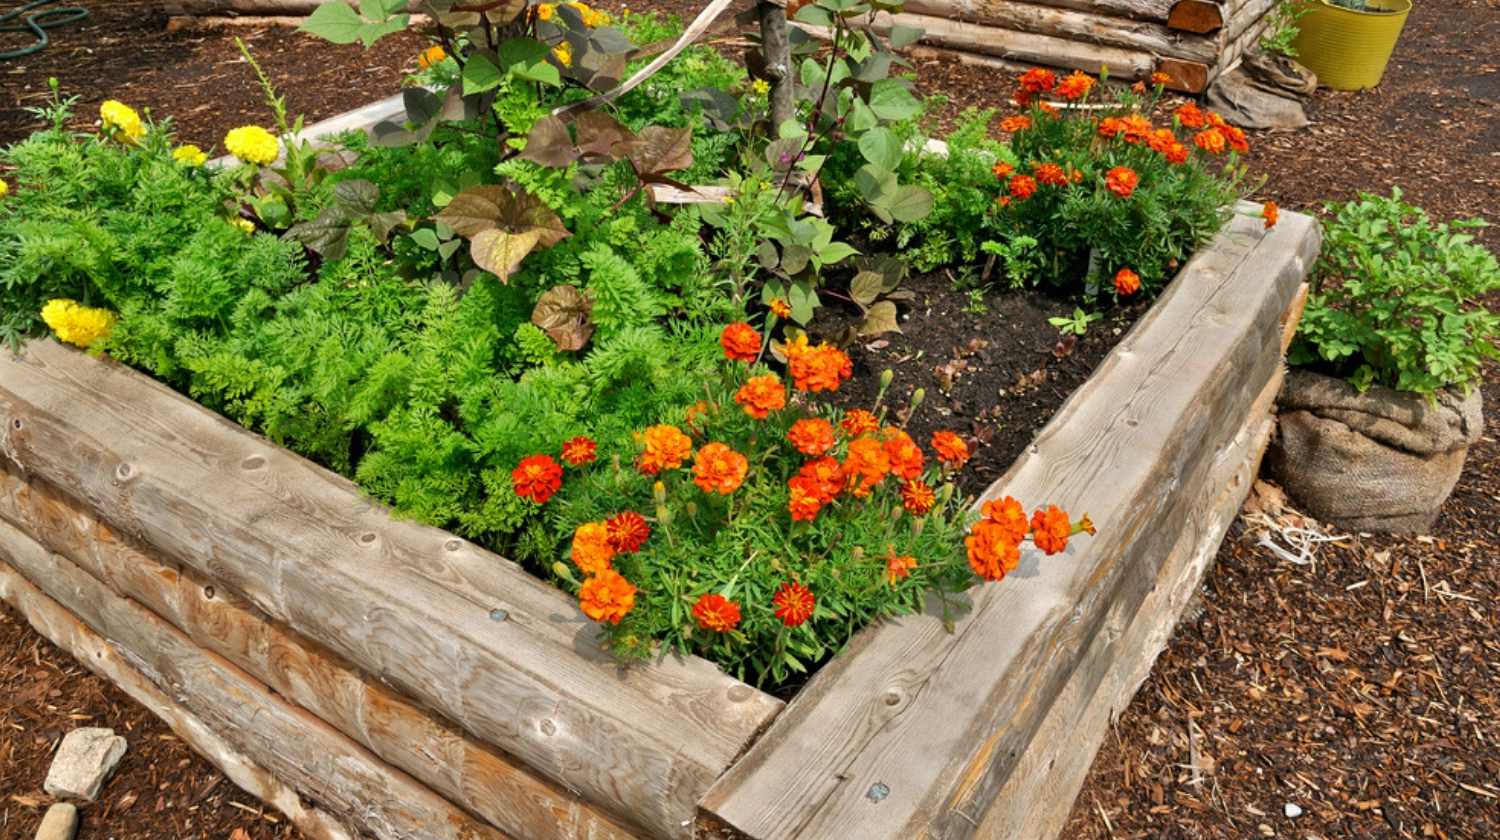 How To Build A Raised Flower Bed Garden, Flower Bed Frame